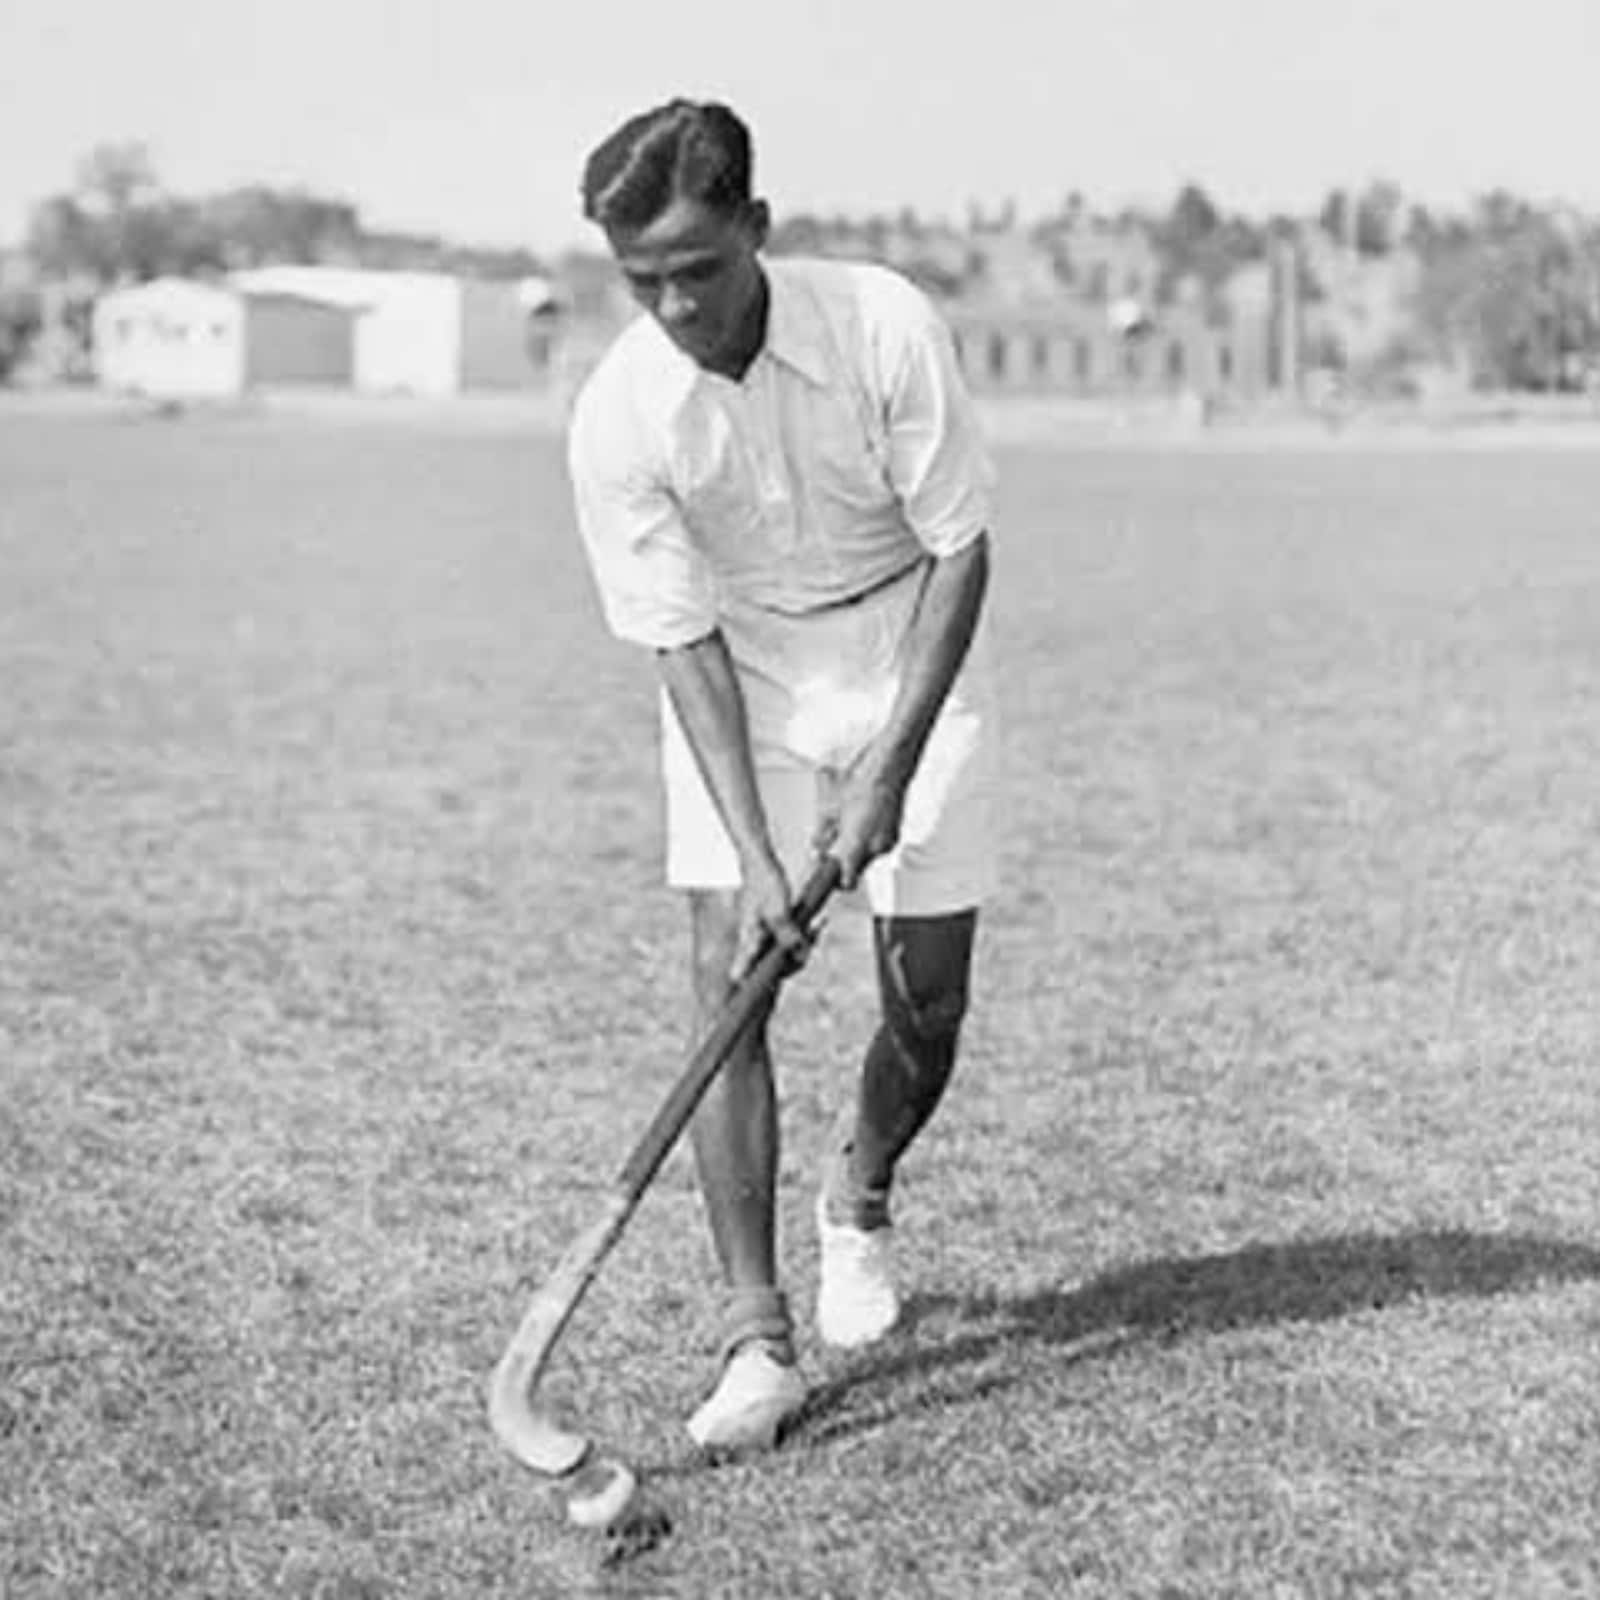 Know Hockey Great Major Dhyan Chand Who Has Had the Khel Ratna Award Named After Him